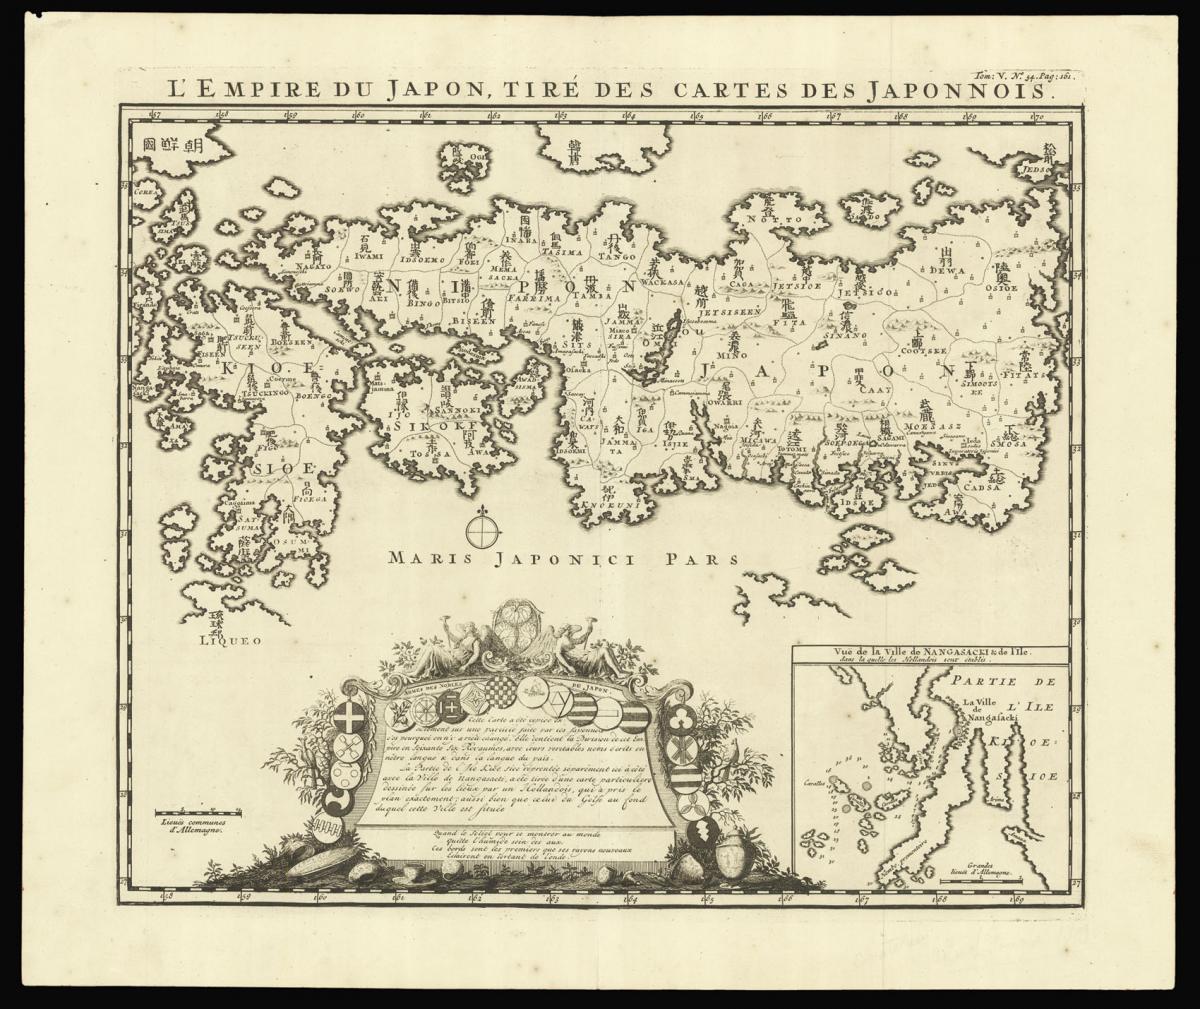 Henri Chatelain's edition of Adrien Reland's important map of Japan 1715